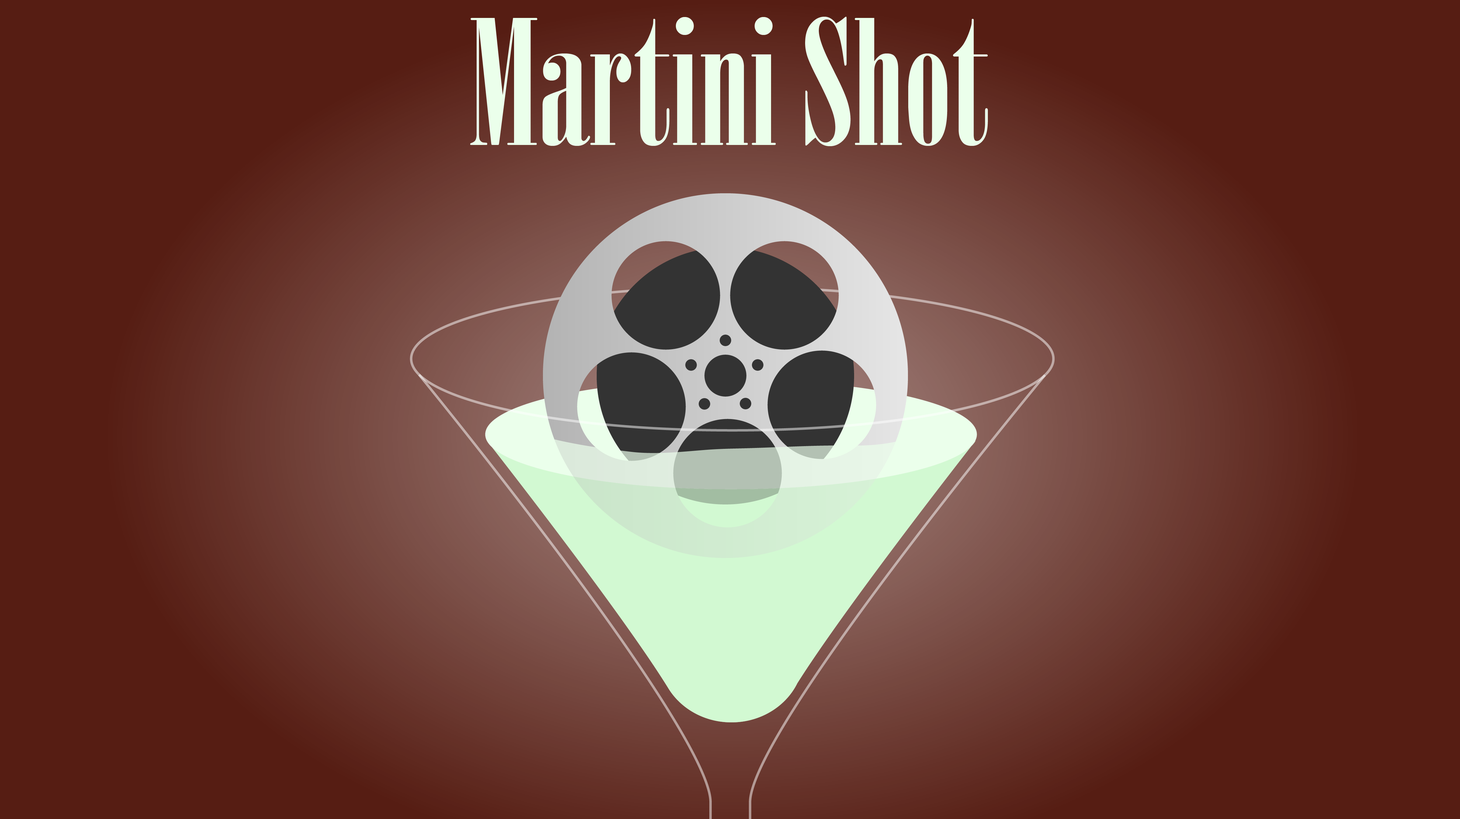 This is Rob Long and on today’s Martini Shot I decide to pitch a show that I’m pretty sure won’t ever get made, but I do like the title: "Liza Minelli, Private Detective."